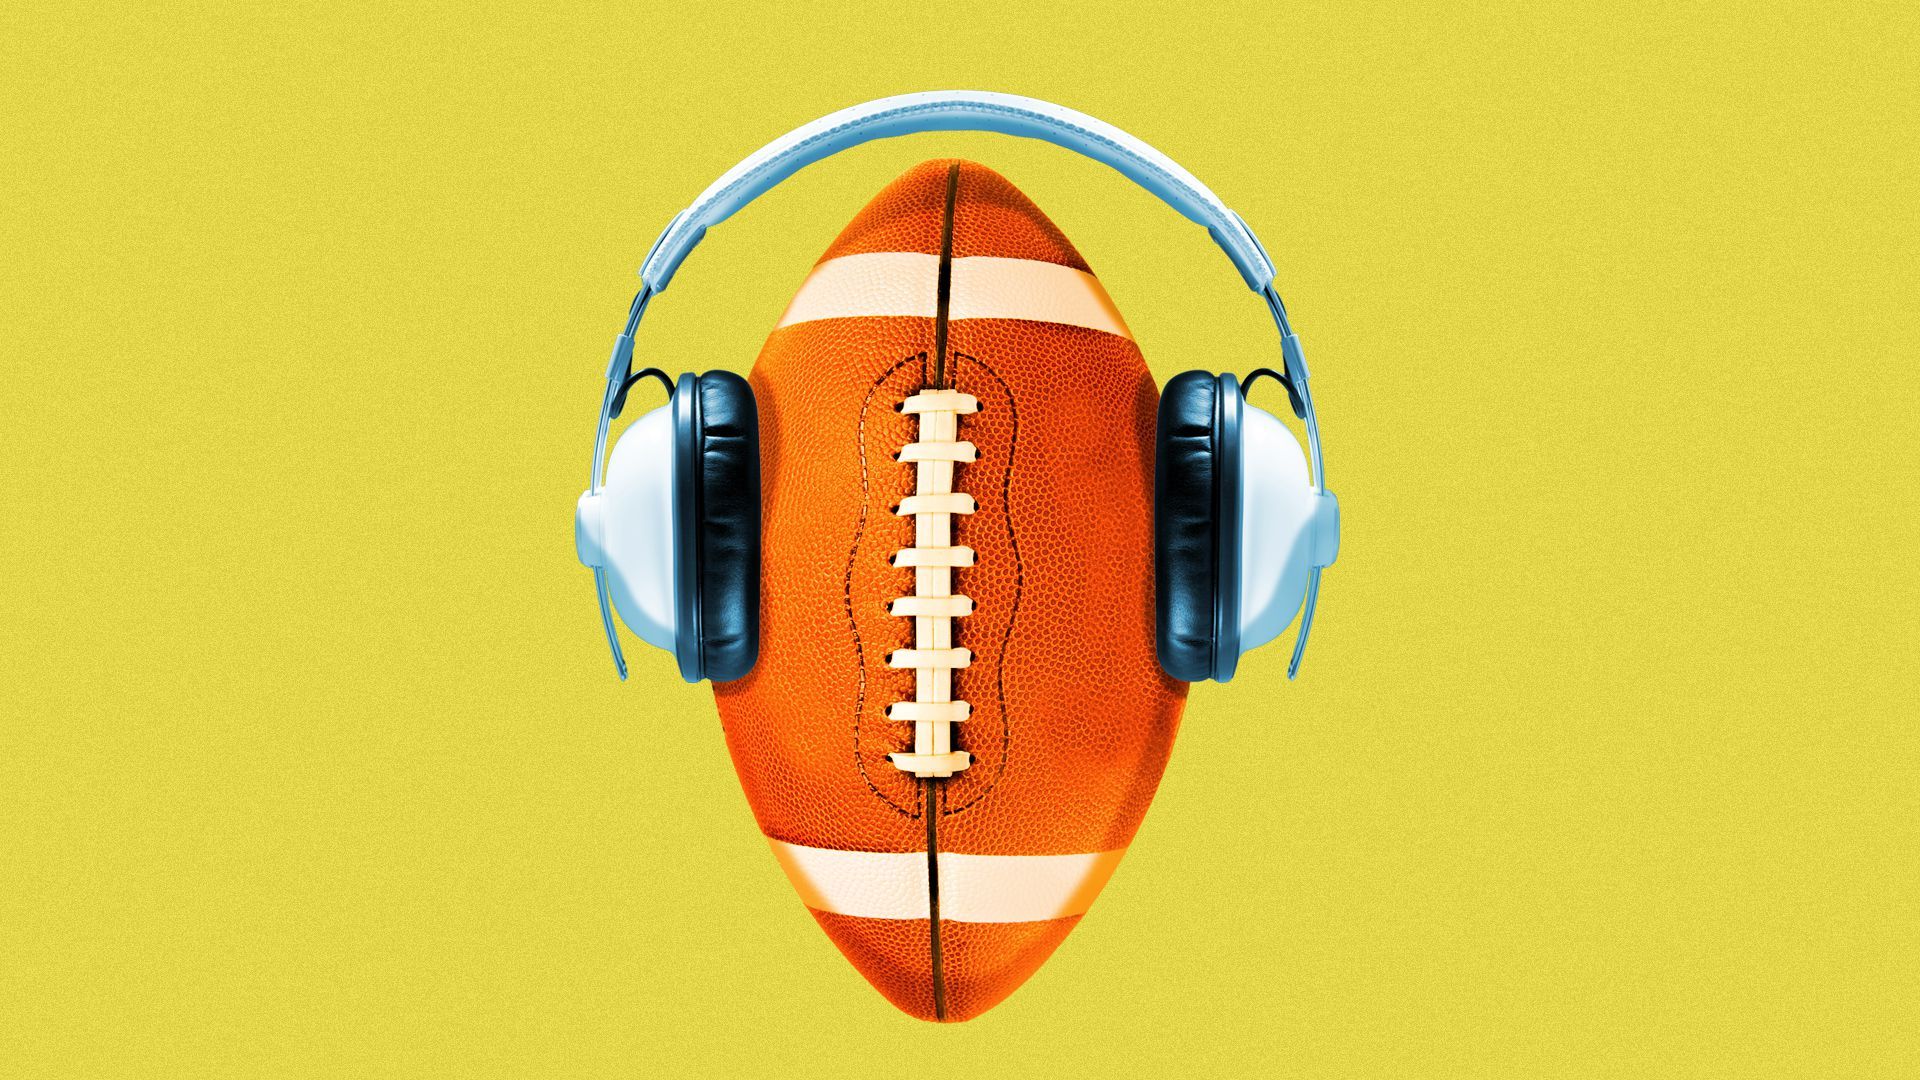 Illustration of a football with headphones on